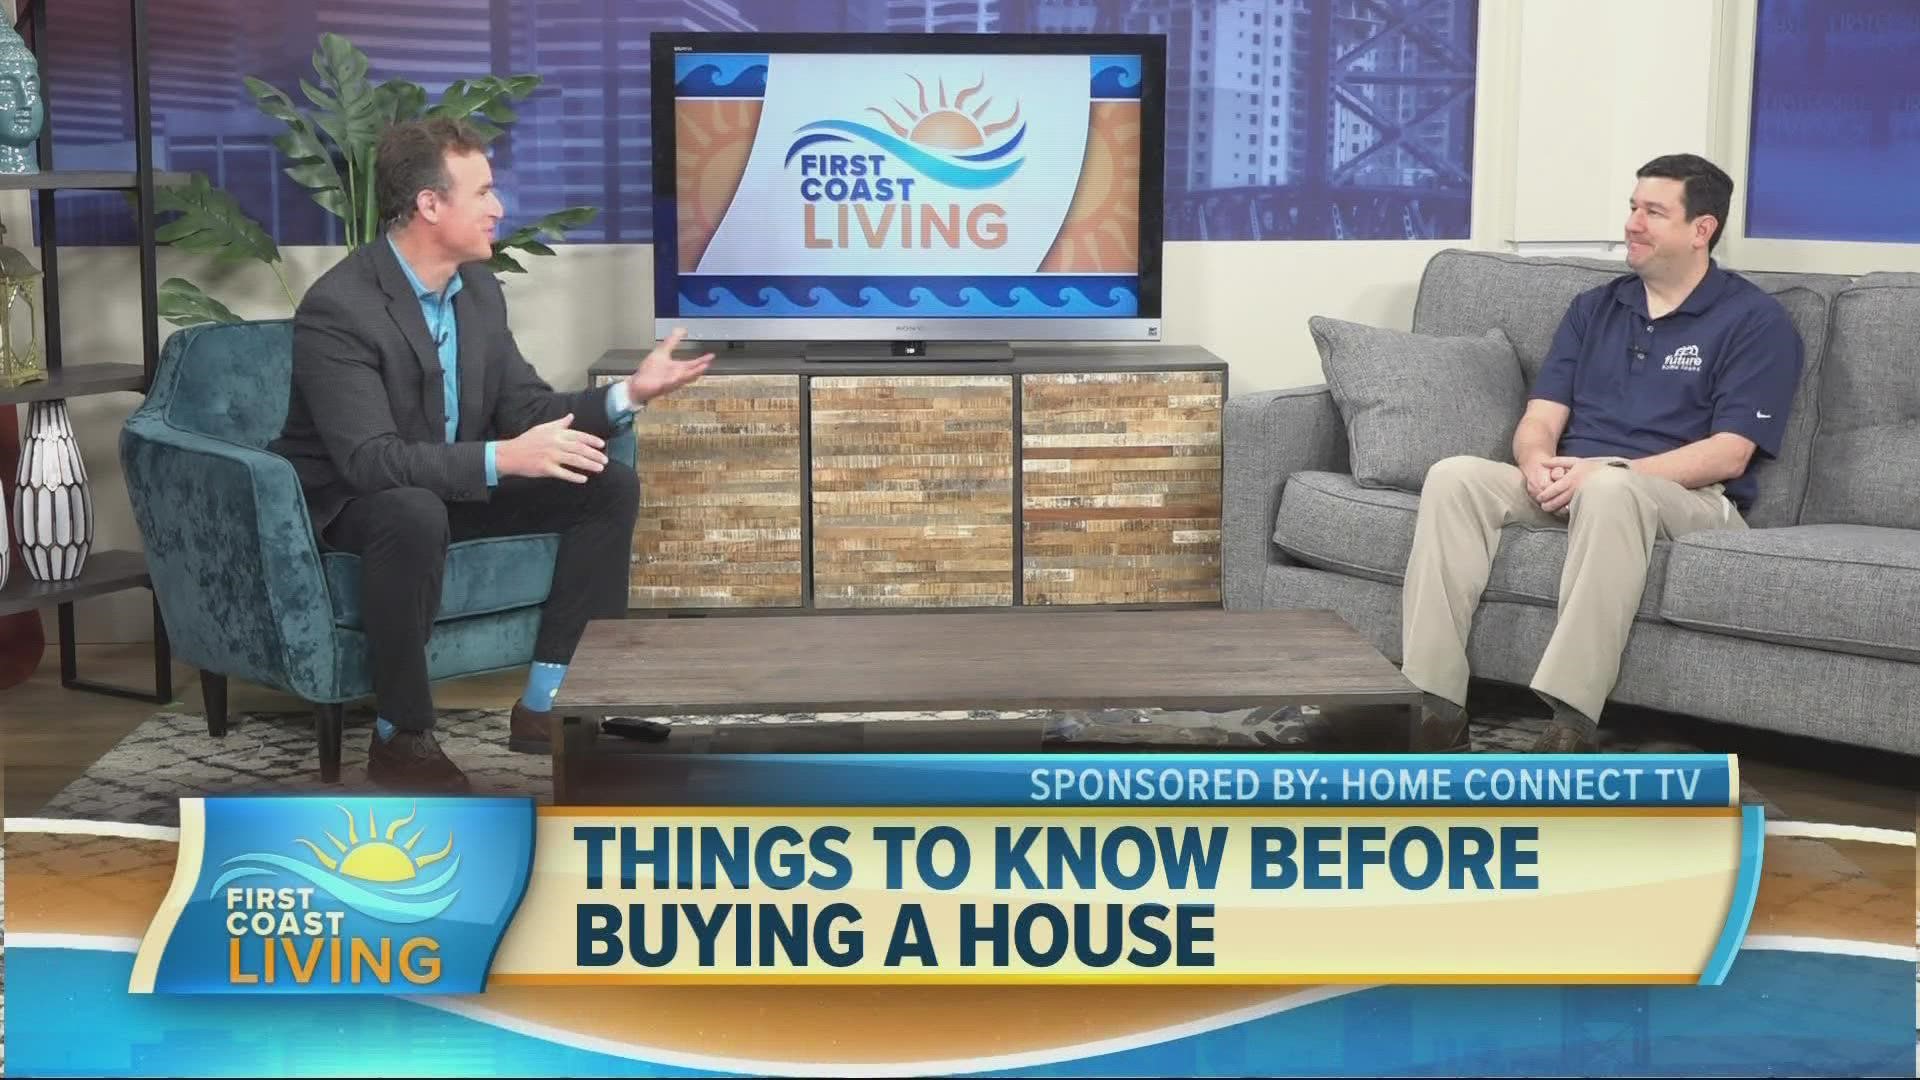 Lee Simanoff of Future Home Loans joins us to talk about what to do first if you are buying a home and why you should seize the day and not wait.